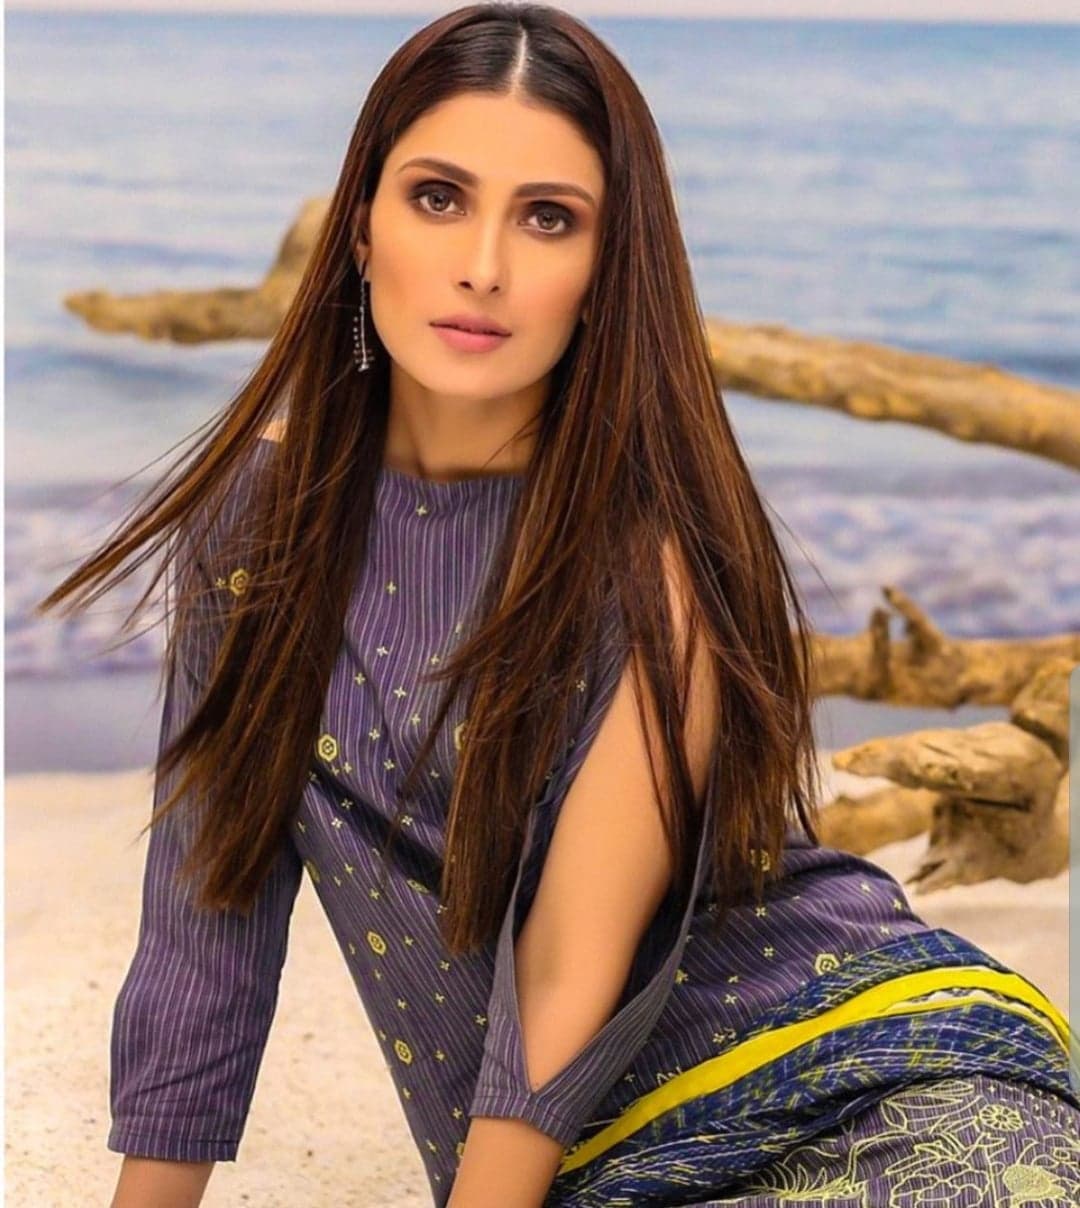 Ayeza Khan | 20 Secrets You Didn't Know About Her